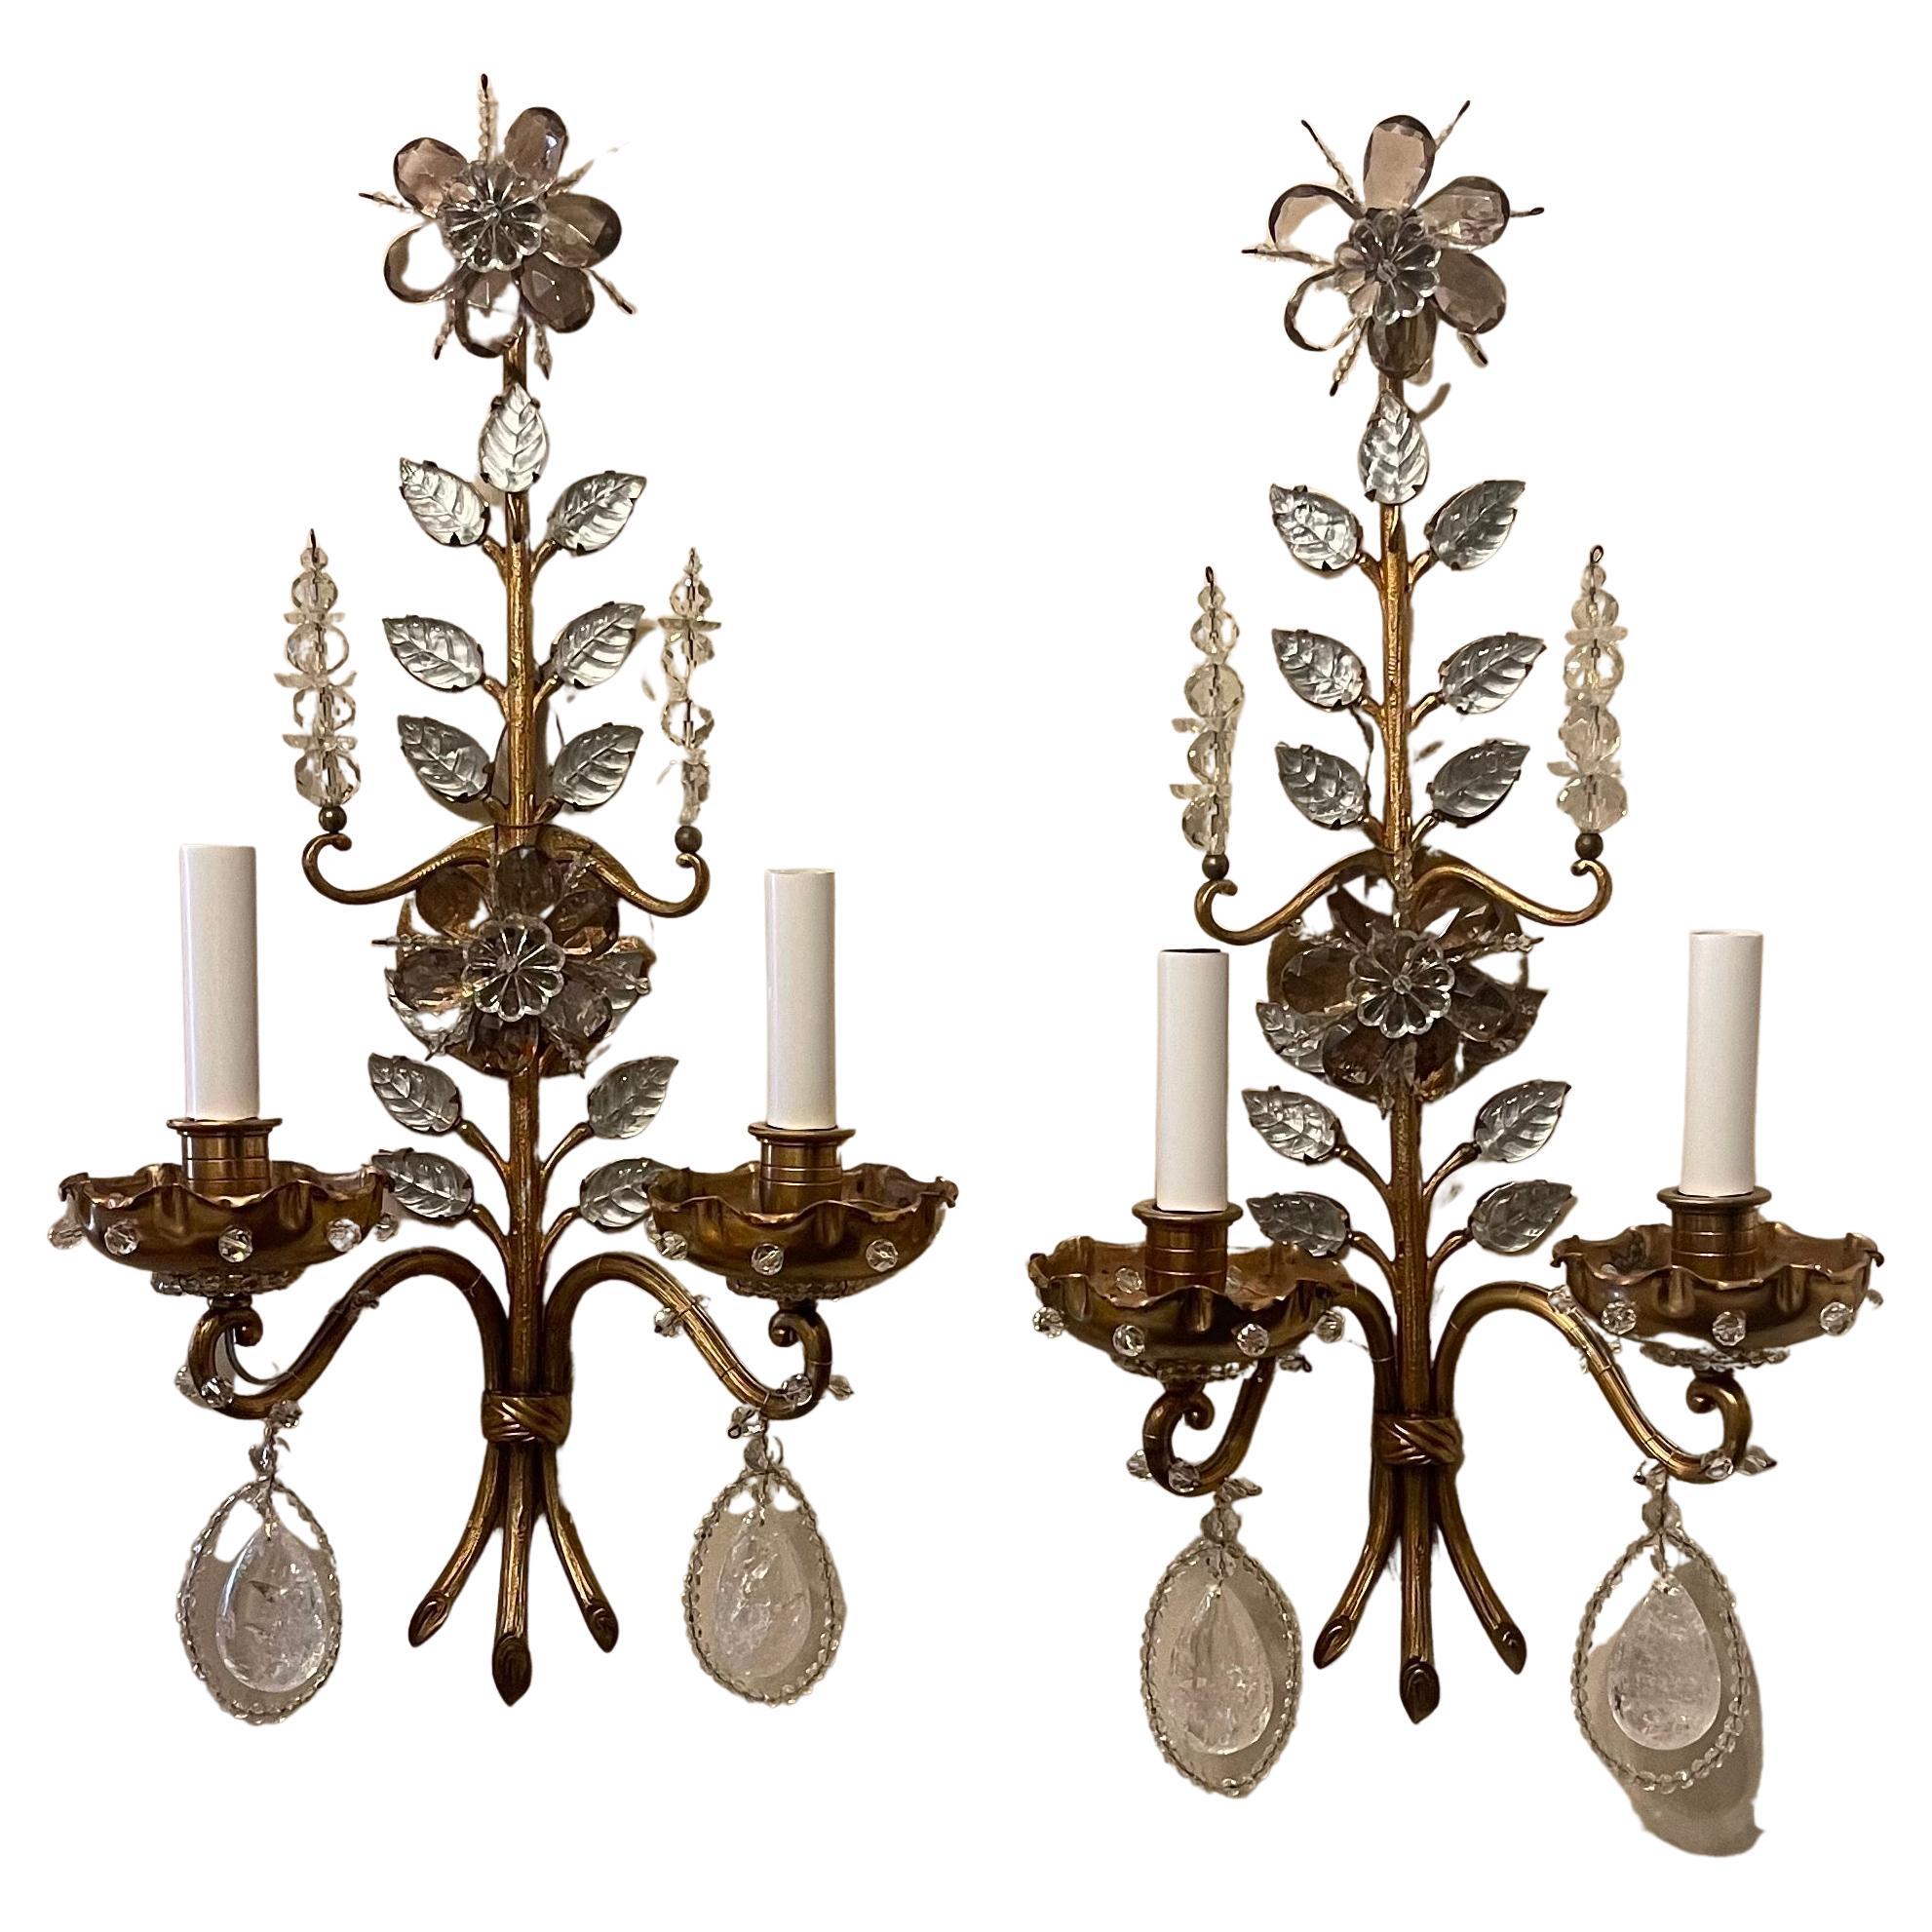 A Wonderful Pair Of French Bronze & Rock Crystal Drop With Amethyst Flower And Leaf Form Maison Baguès Two Candelabra Light Sconces Retailed By Nestle's NYC.

*Completely Rewired With New Sockets And Ready To Install